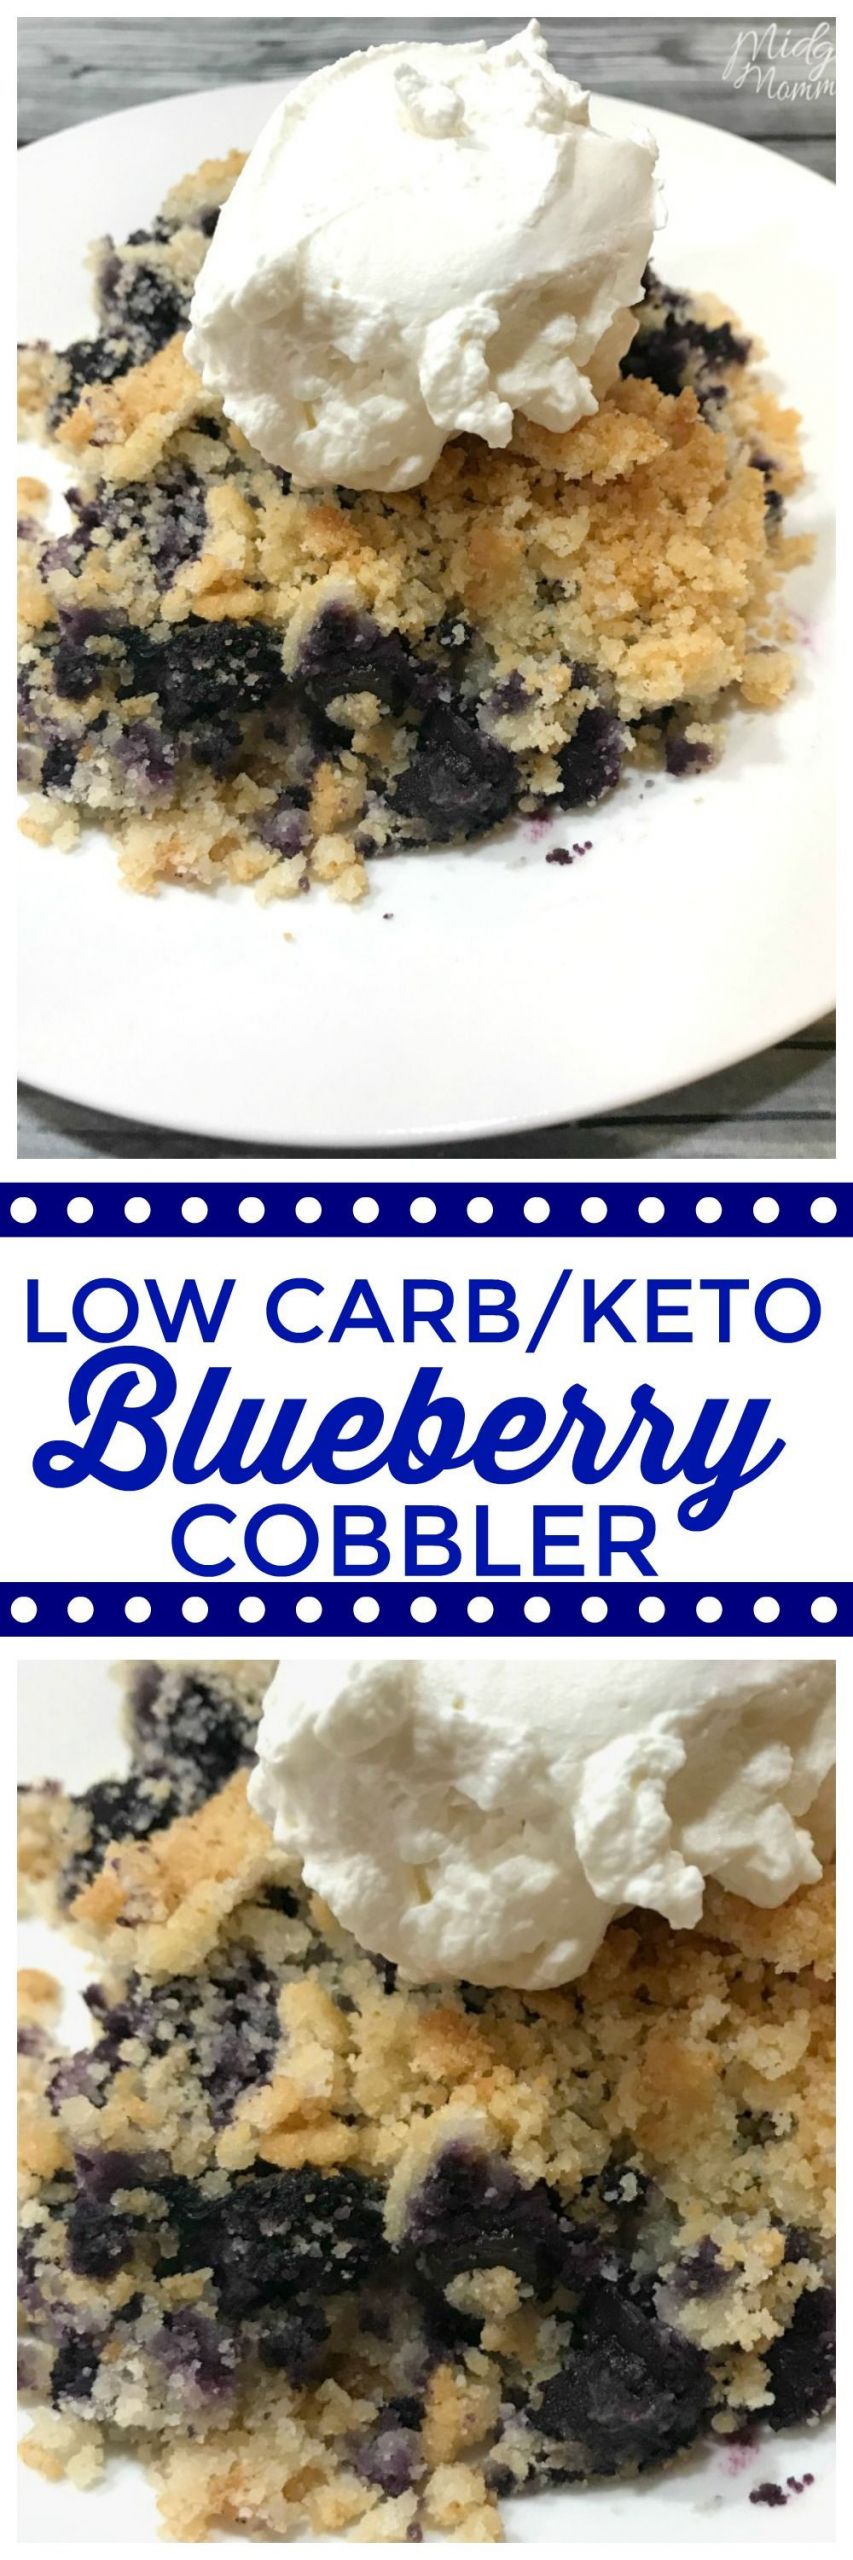 Blueberry Keto Dessert
 This Low carb Keto Blueberry Cobbler is the perfect easy